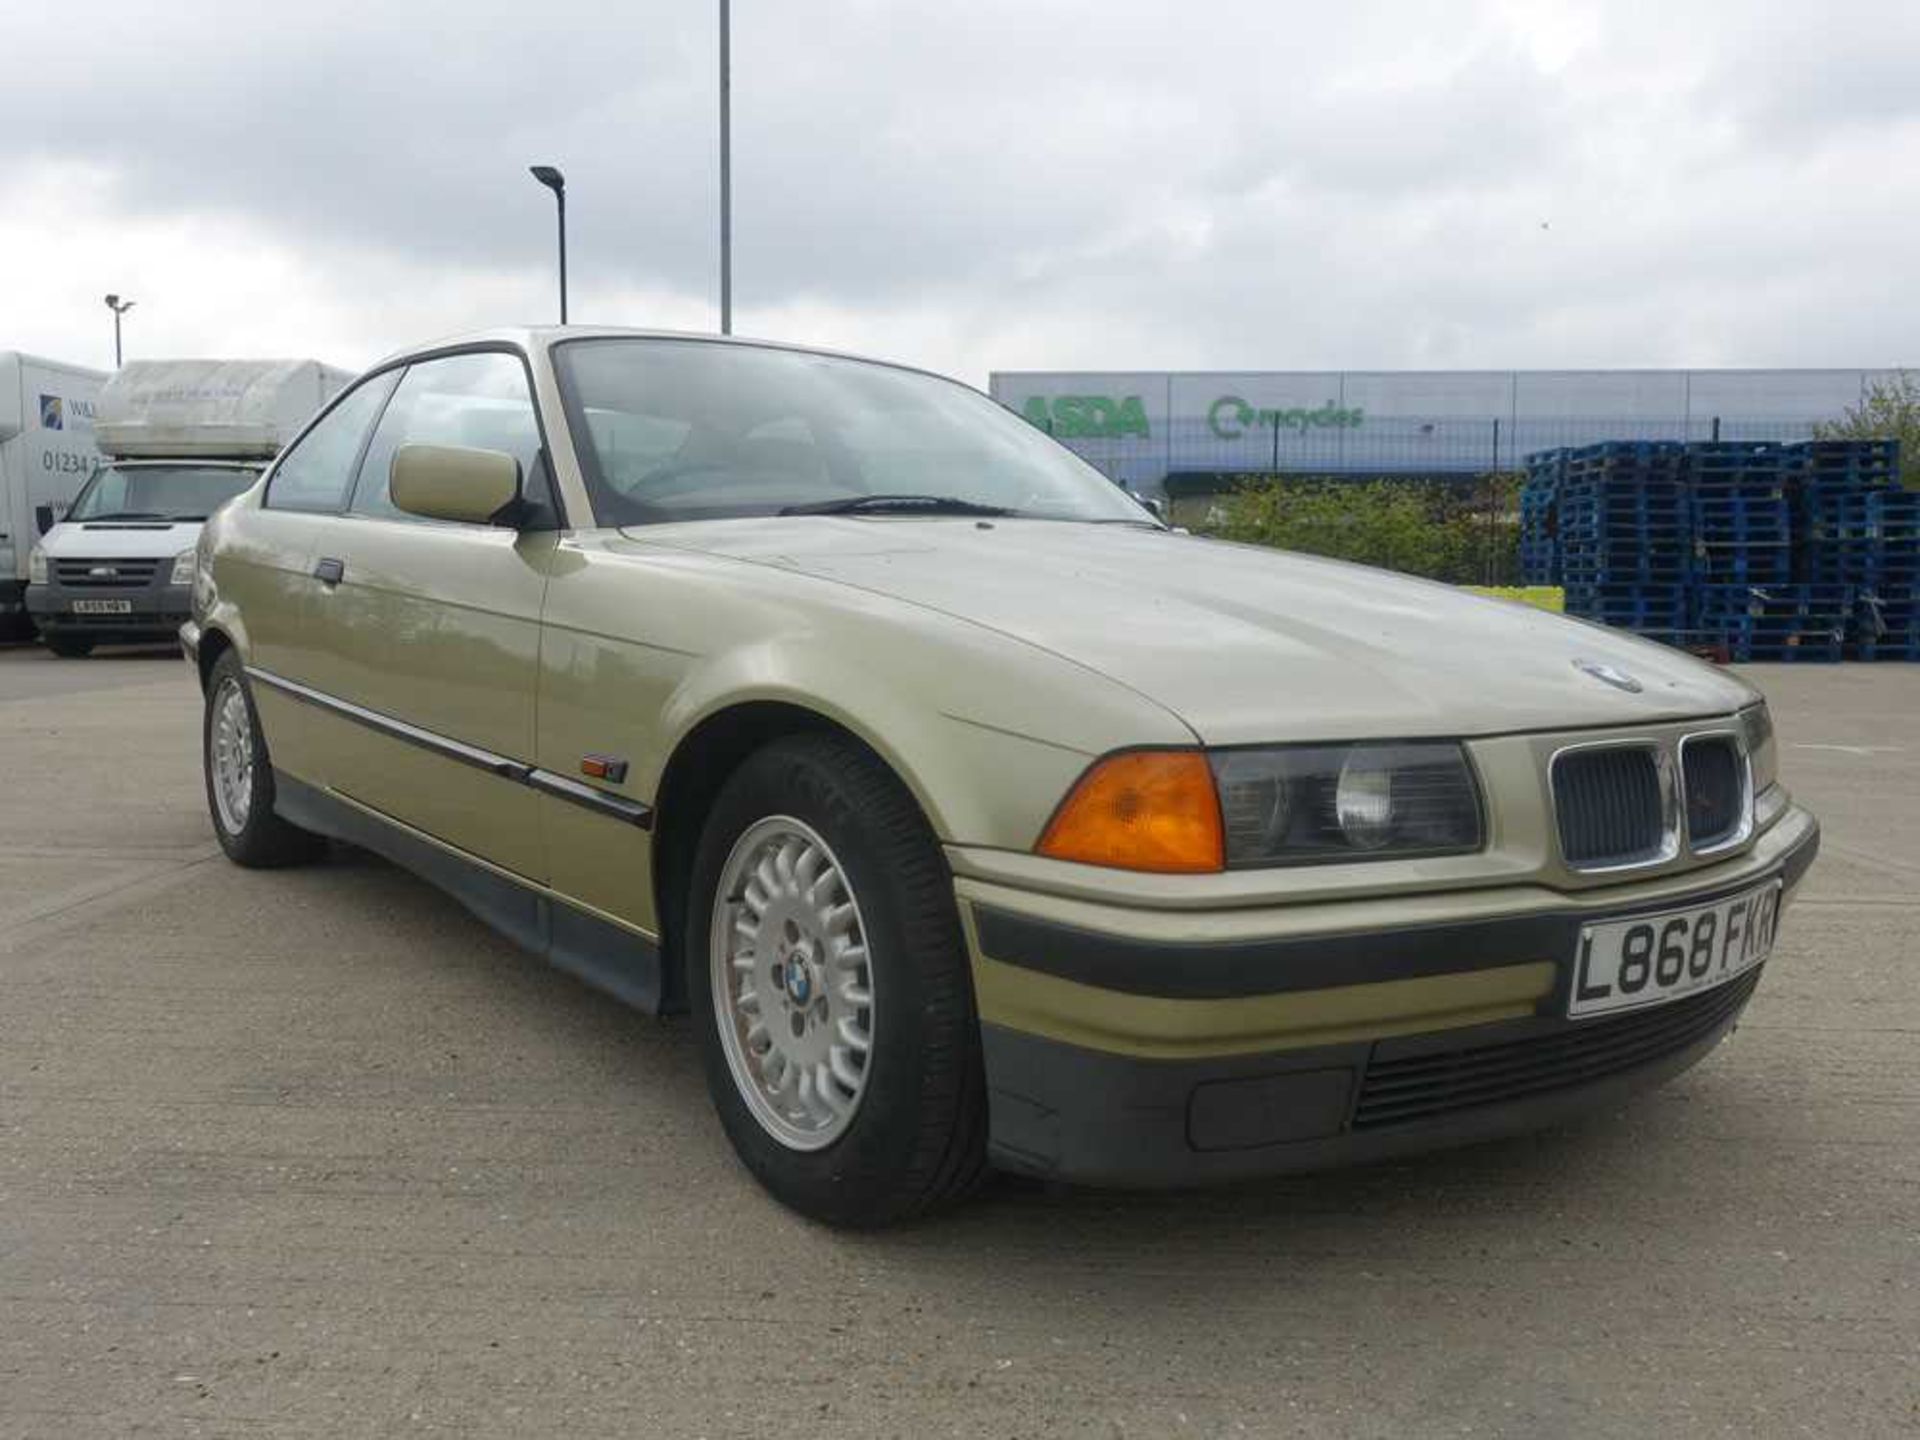 BMW 318 i S Auto Coupe in gold, first registered 16.04.1994, registration plate L868 FKR, 2 door,